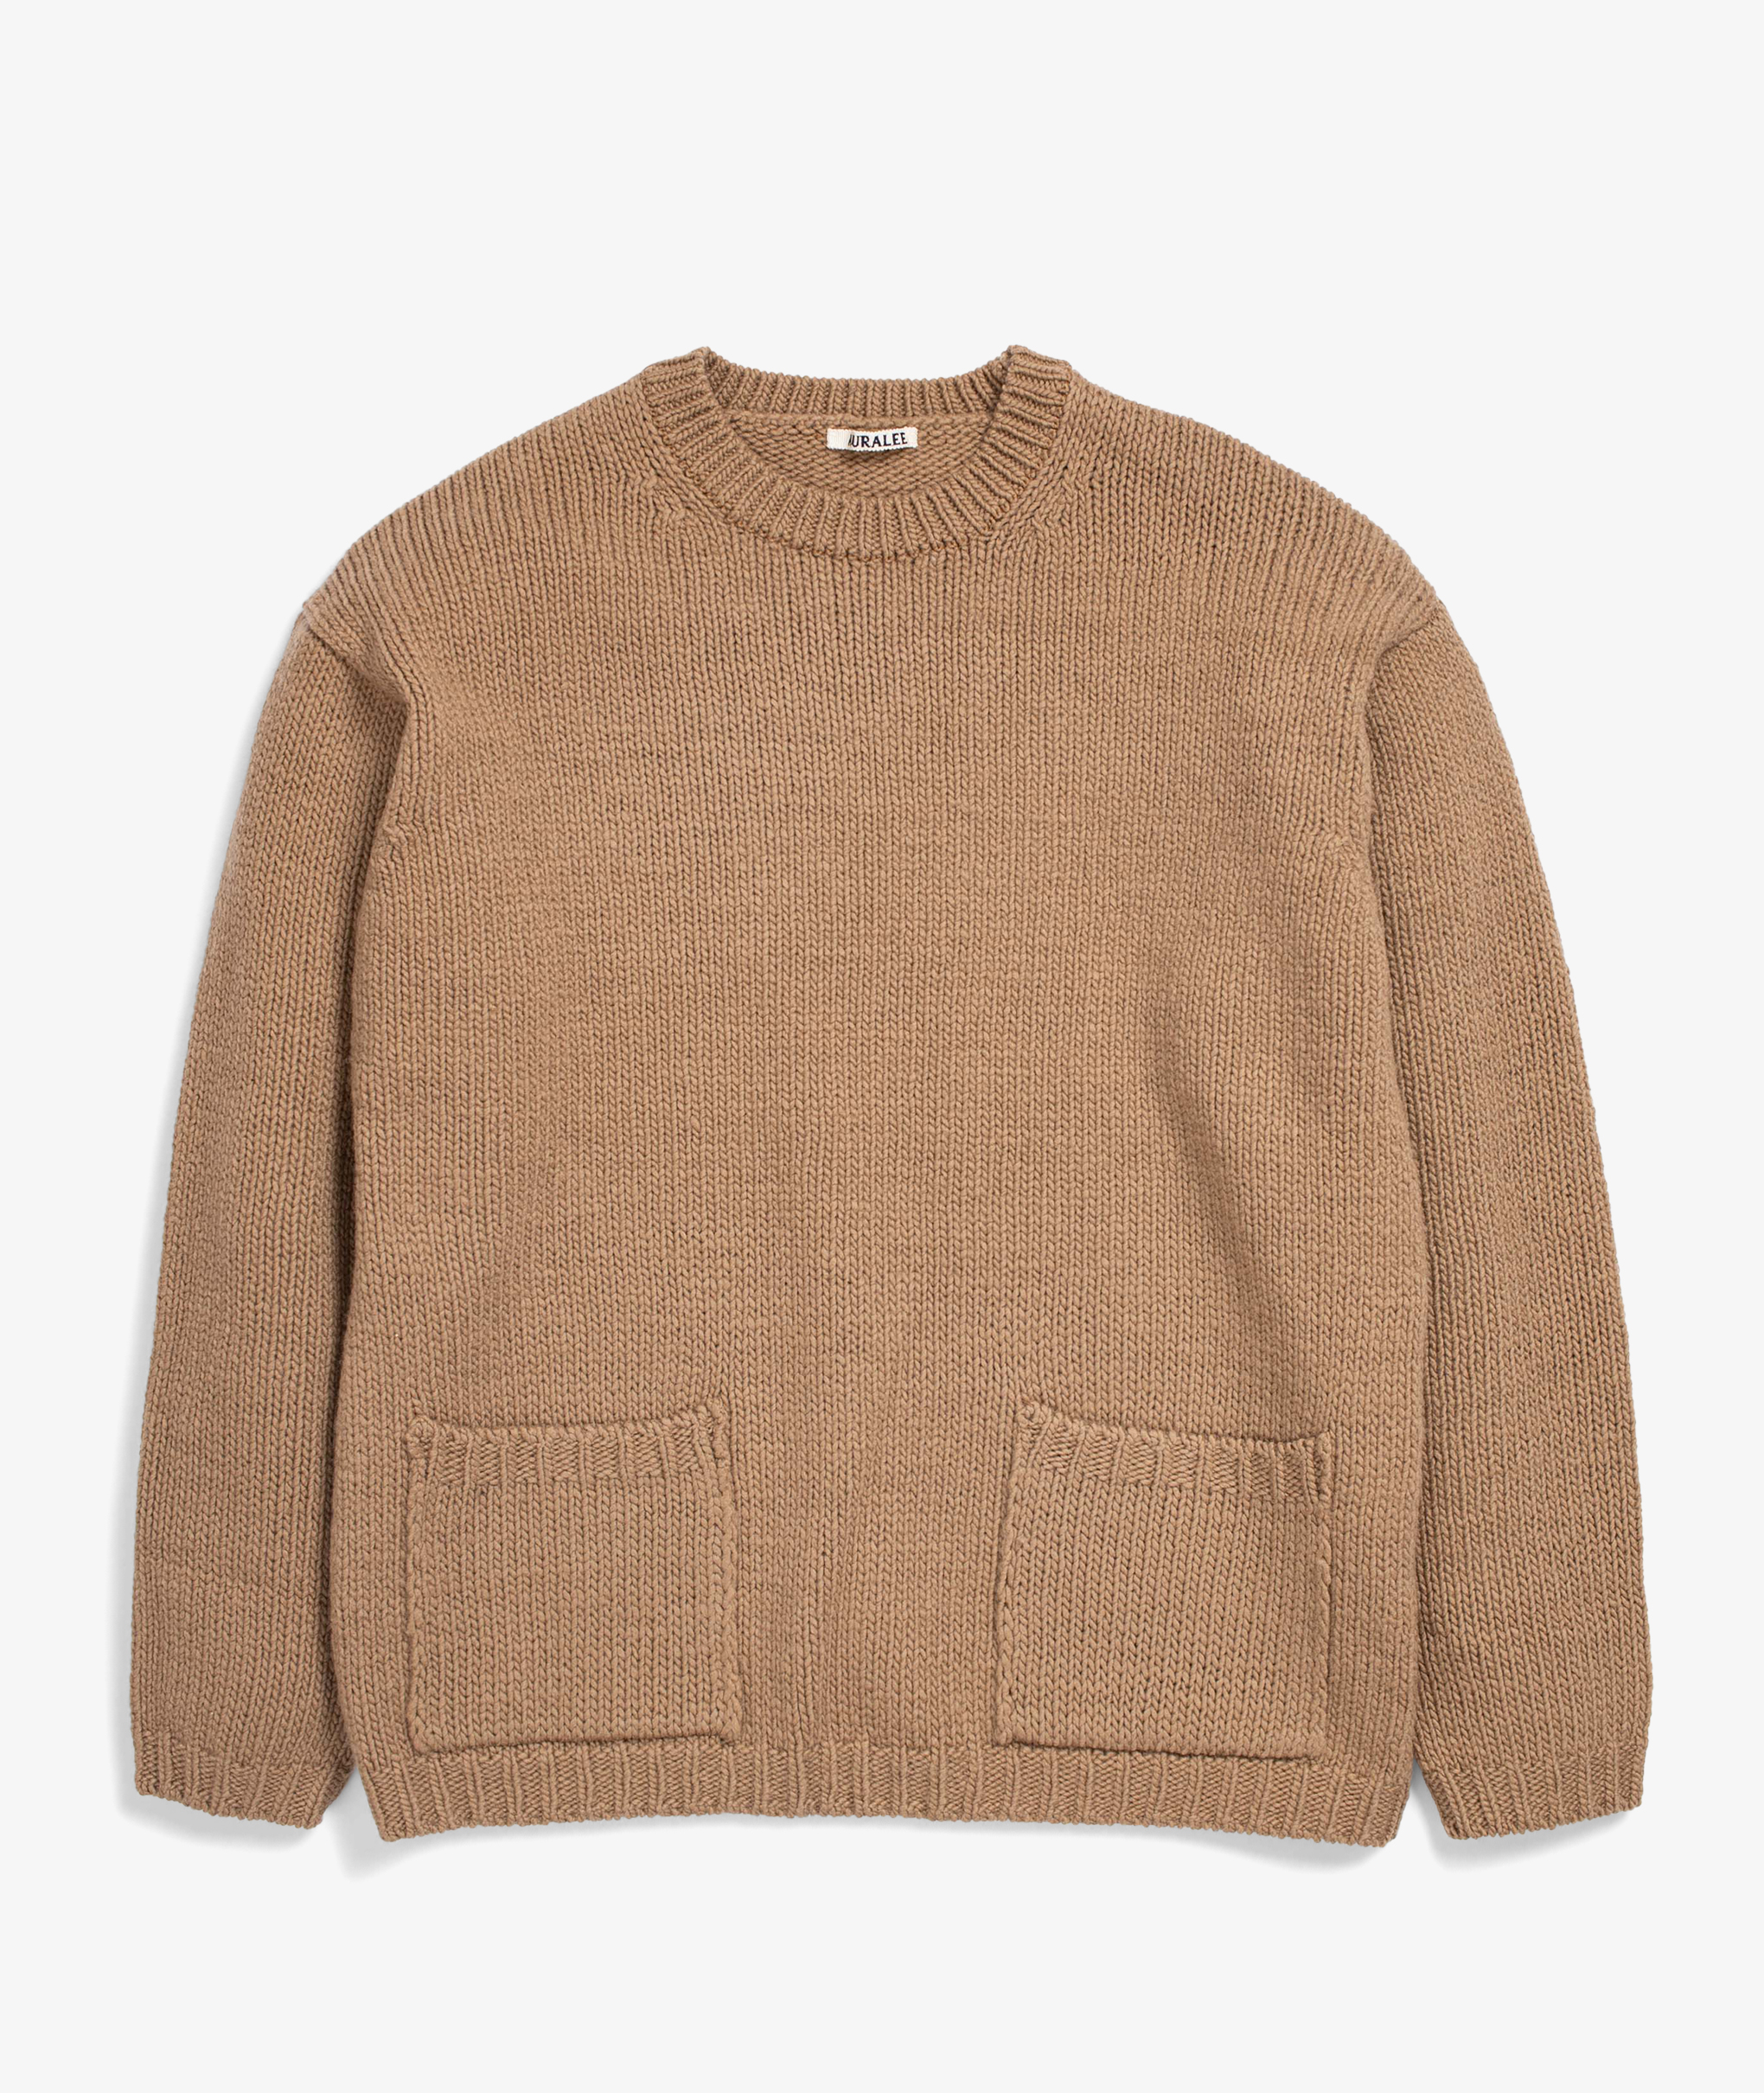 AURALEE 23aw FELTED WOOL KNIT P/O